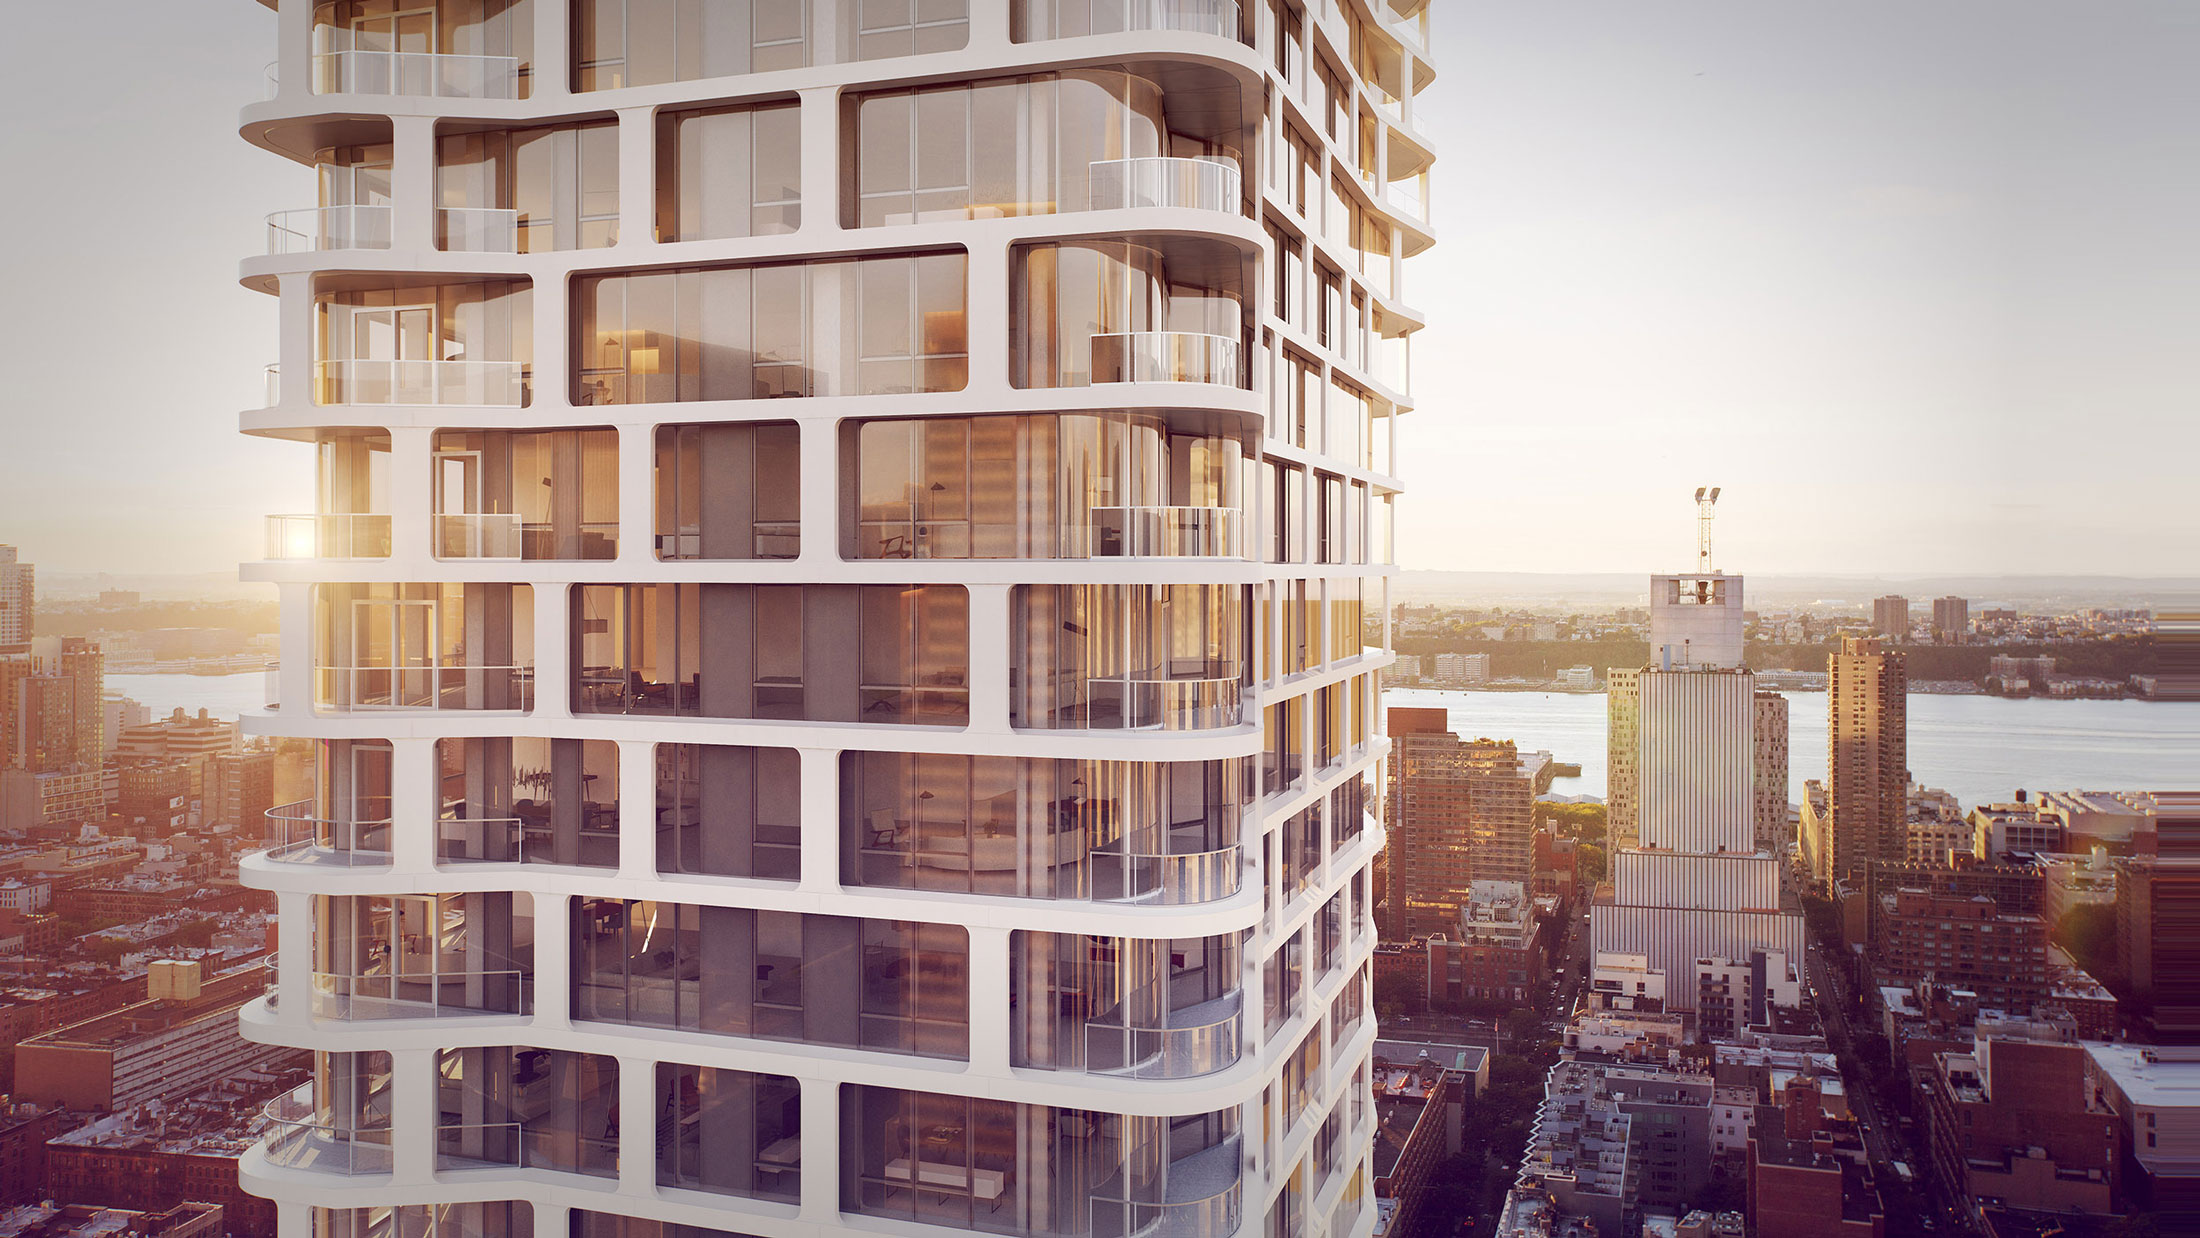 Architectural Rendering of the exterior of the 242 West 53rd Street project located in Midtown, New York City